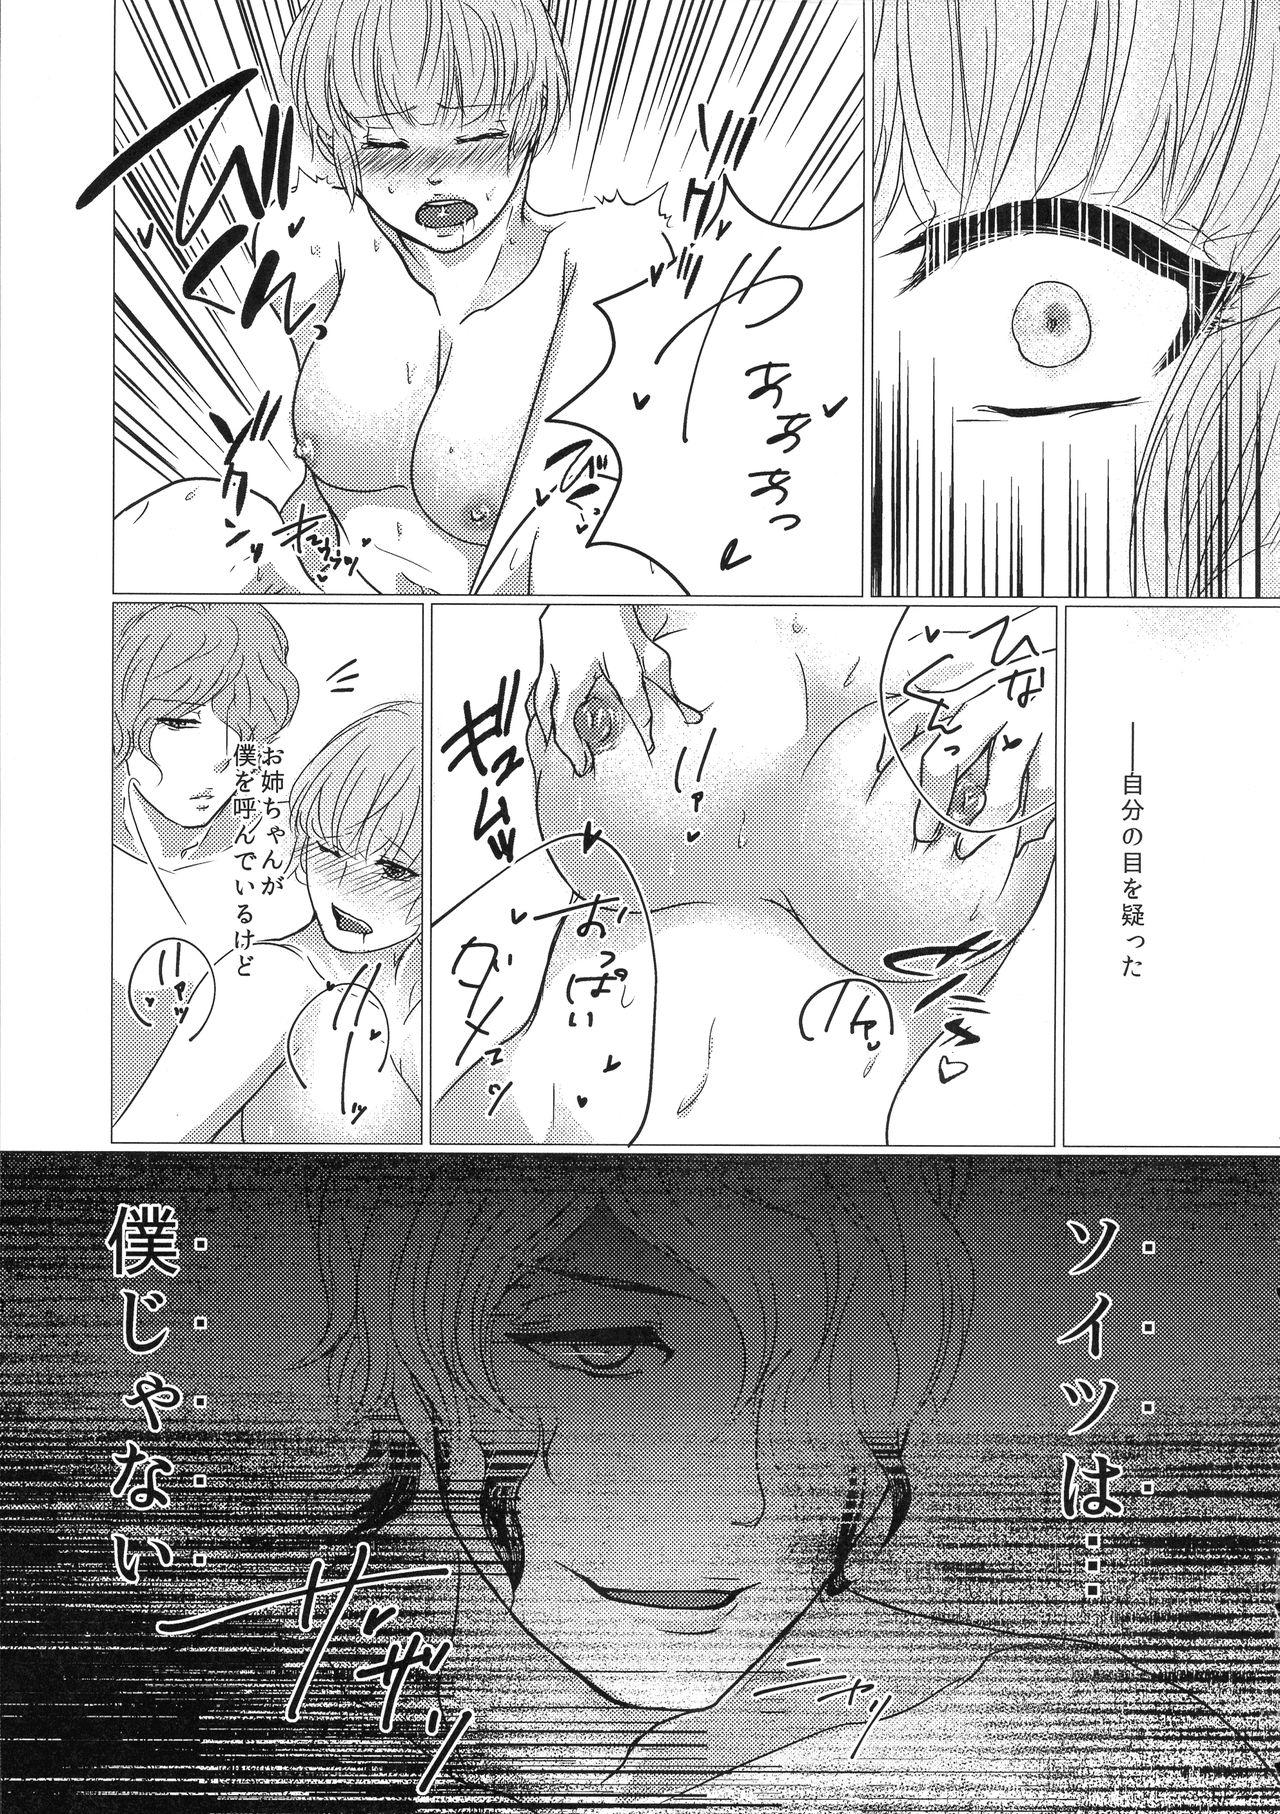 Funk I/O - Psycho-pass Amateur Teen - Page 9